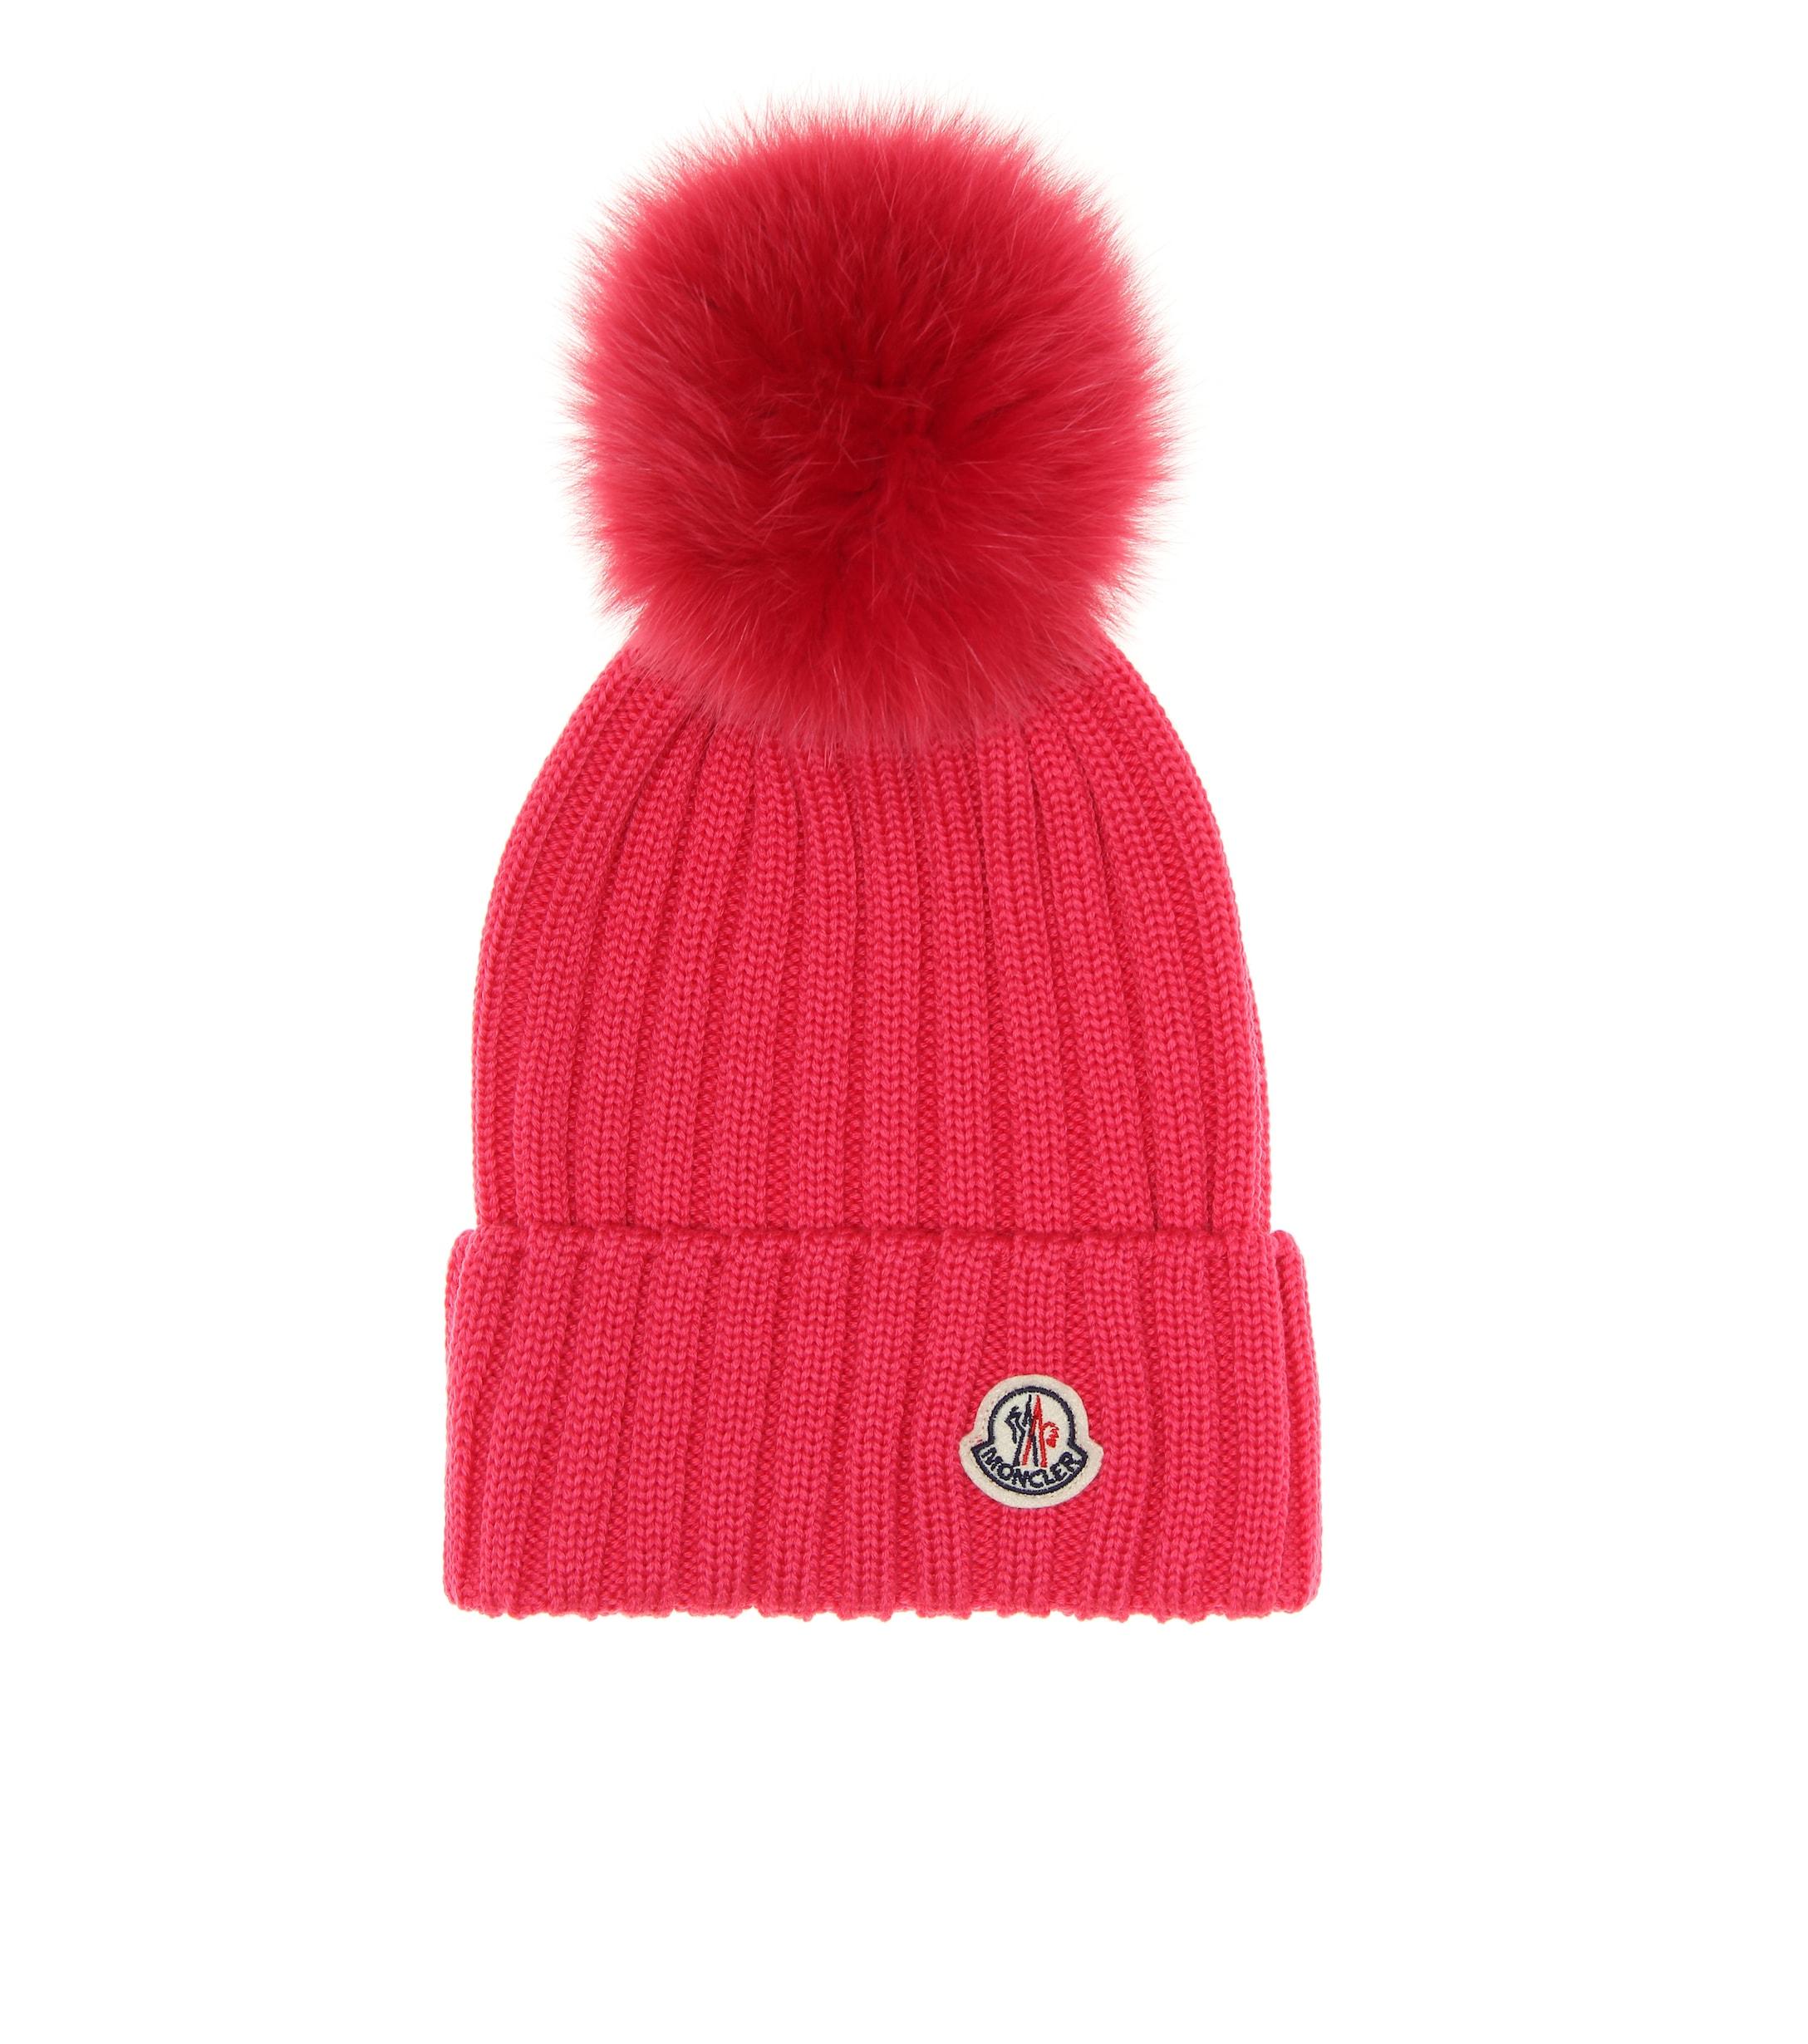 Moncler Fur-trimmed Wool Beanie in Pink - Lyst